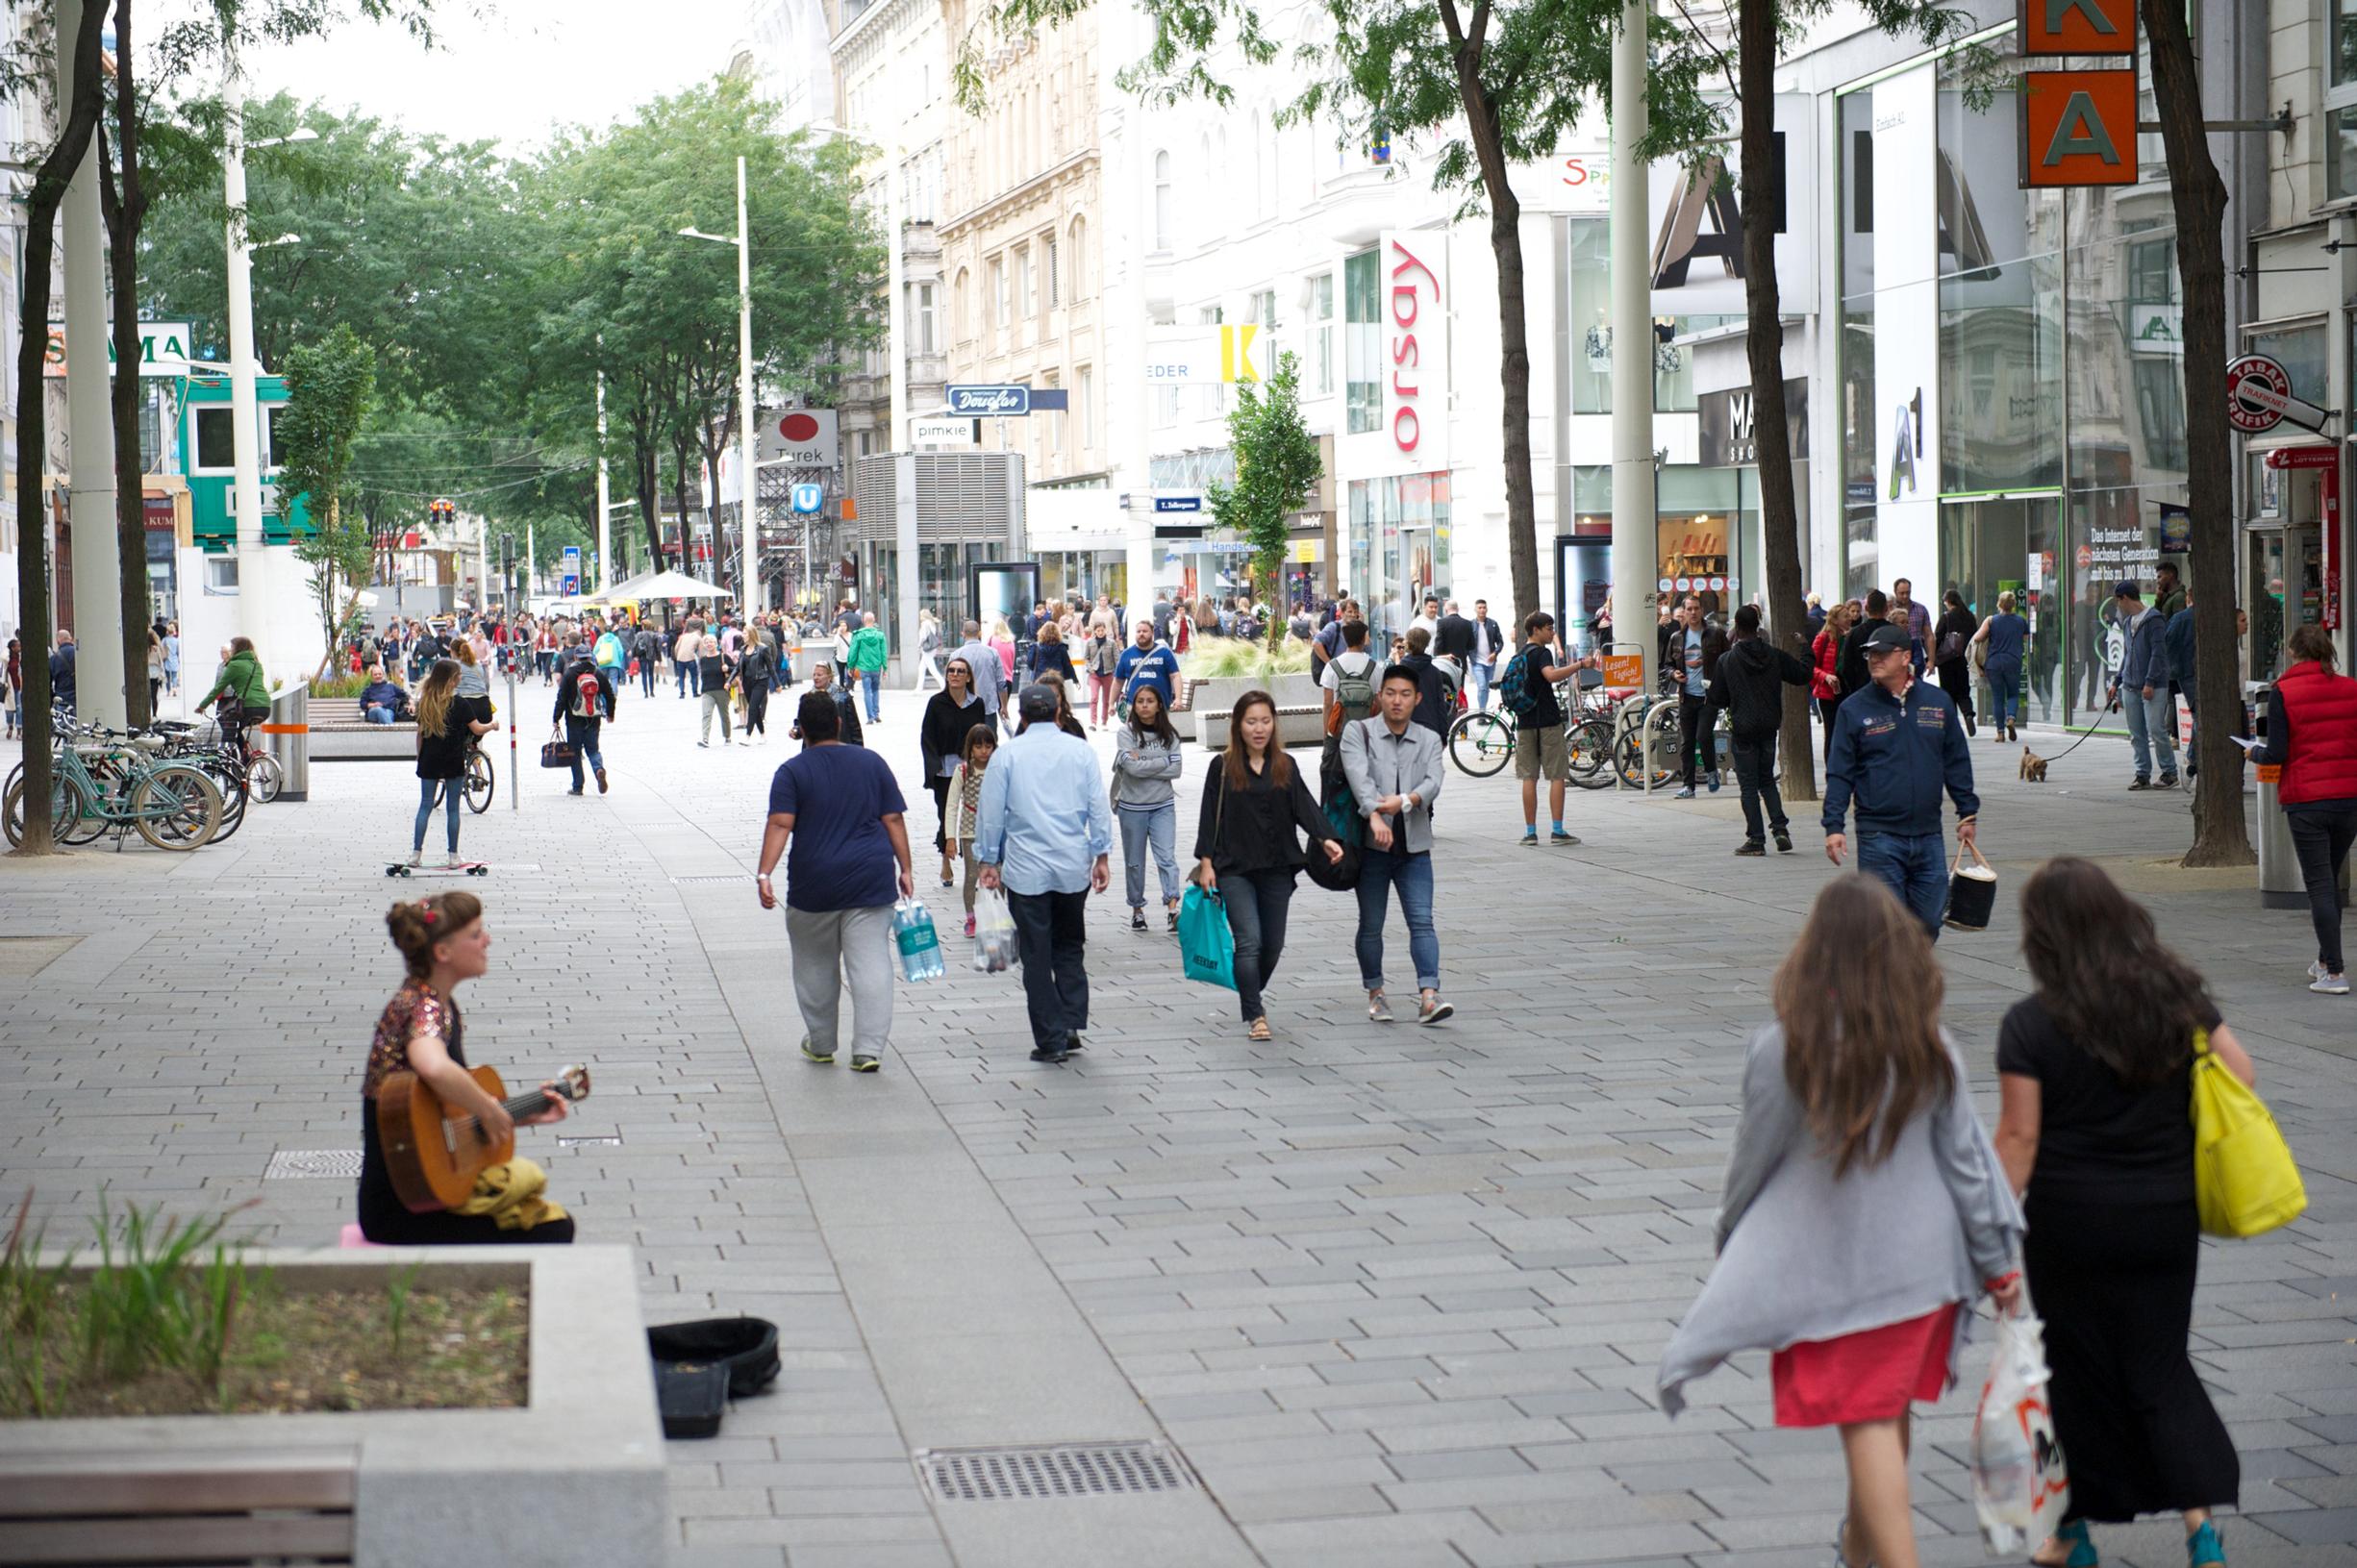 Public spaces in Vienna are made, whenever possible, to be places not streets